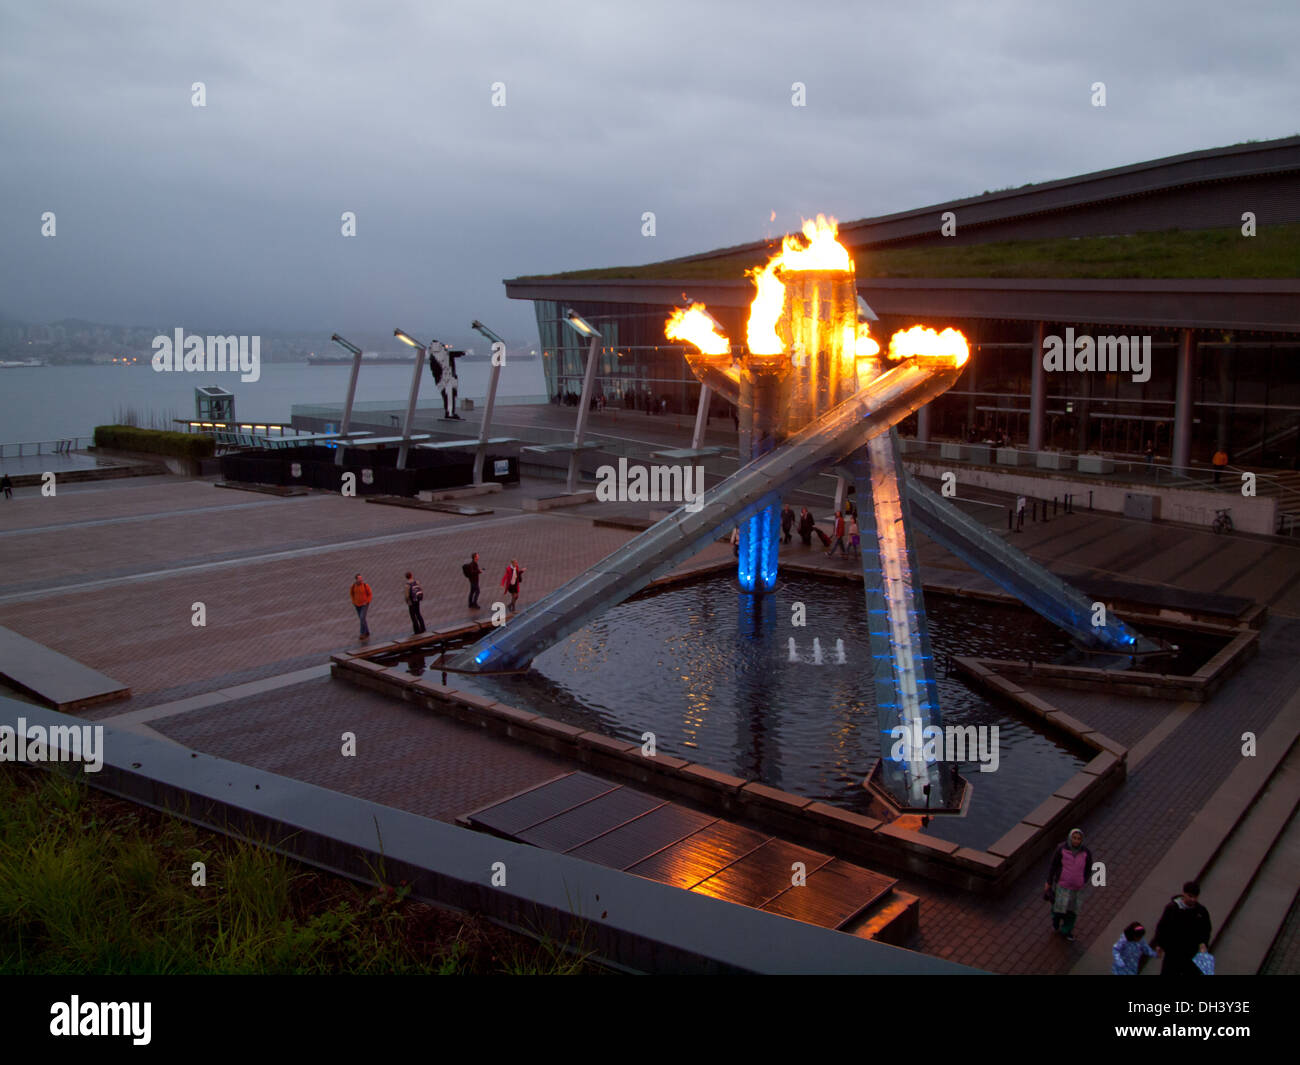 The Vancouver Olympic Cauldron is lit during the rain on Jack Poole Plaza at the Vancouver Convention Centre in Vancouver, BC. Stock Photo